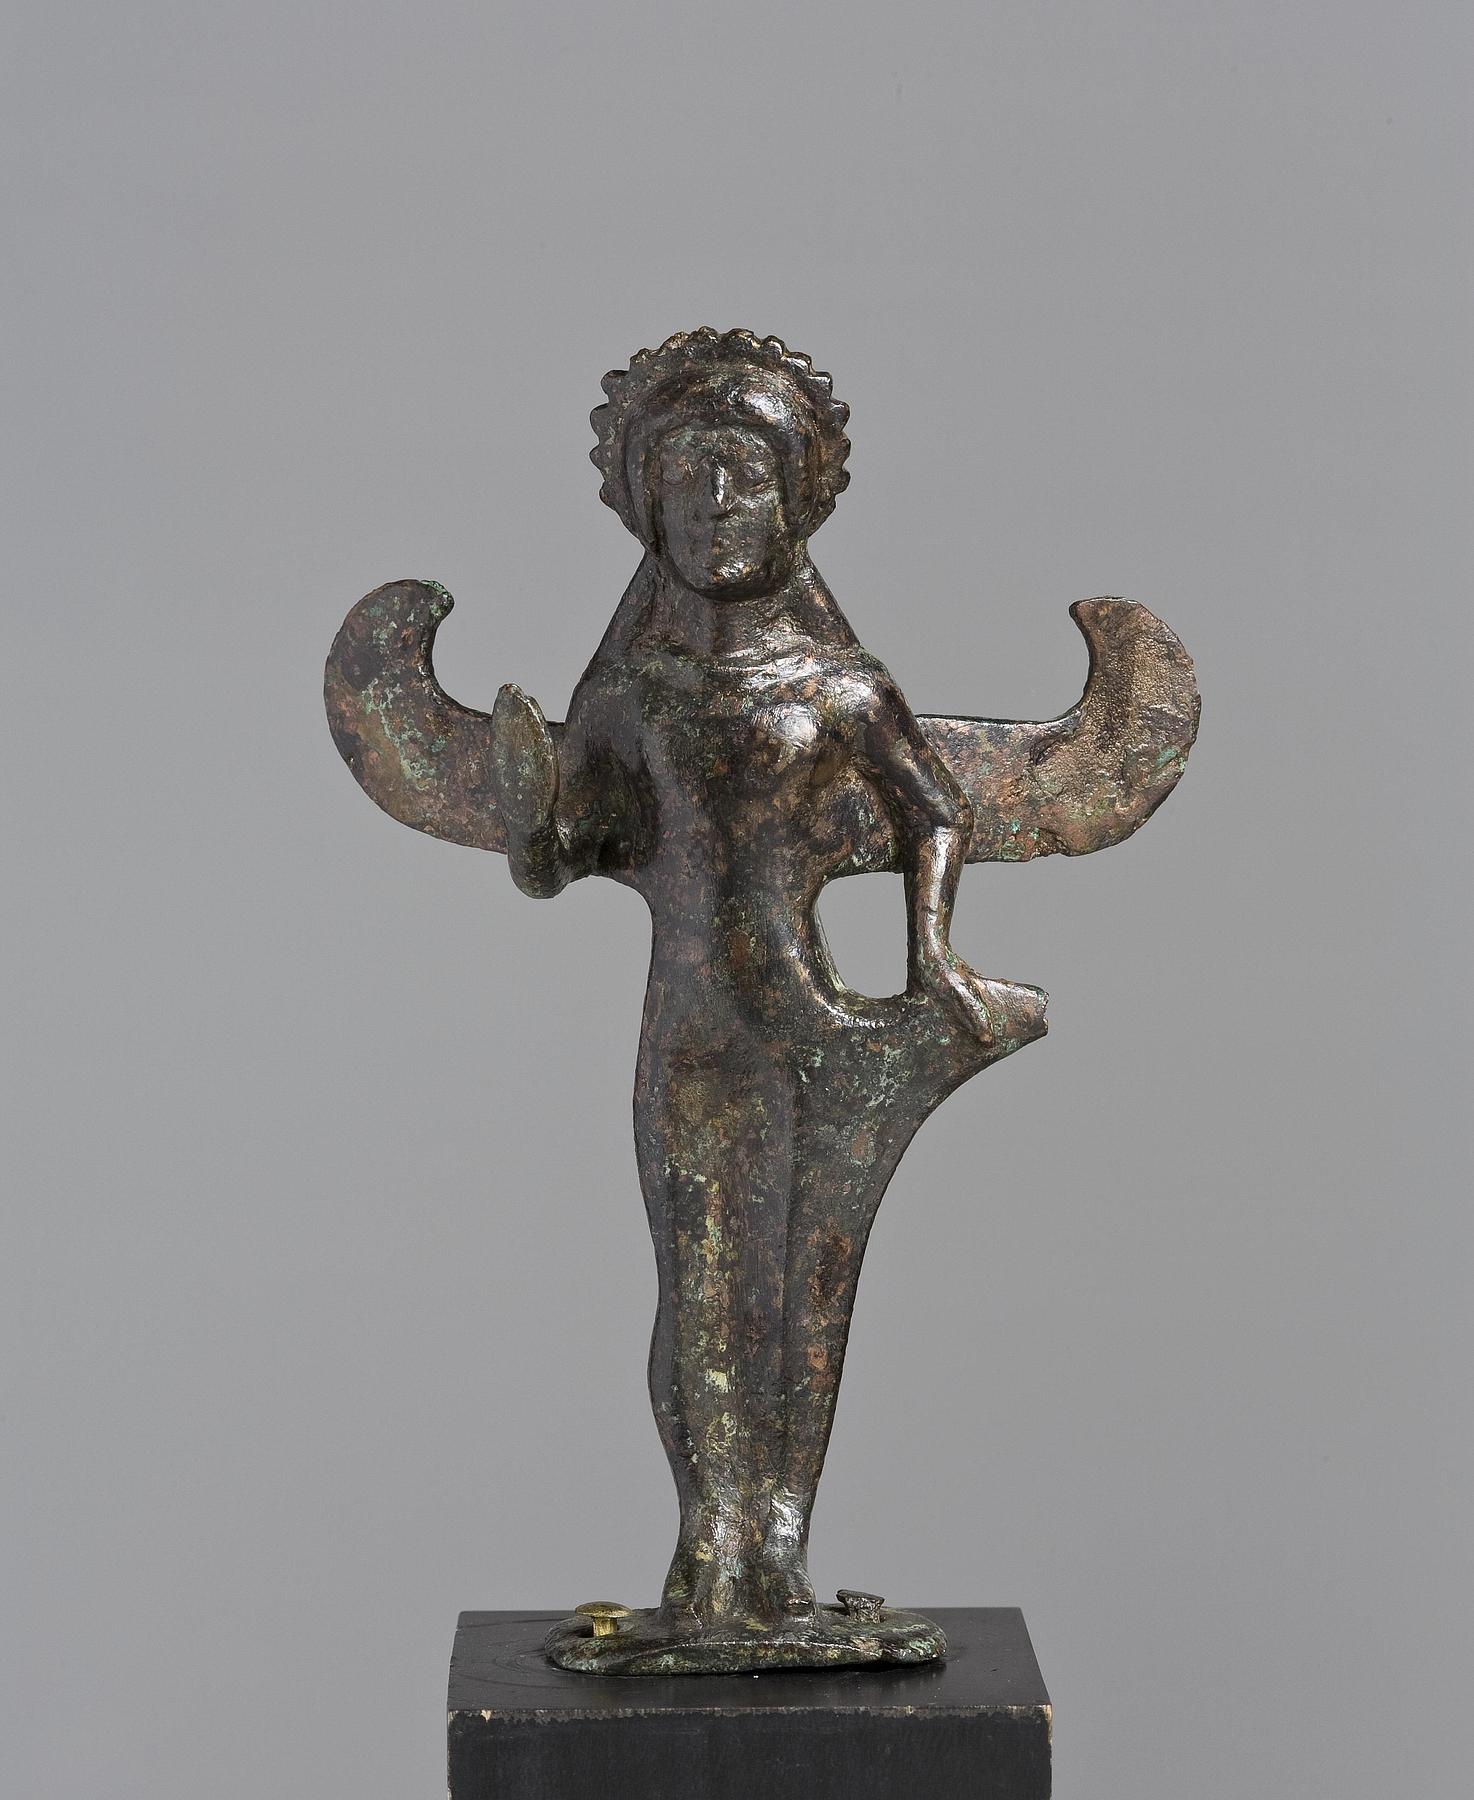 Statuette of a winged goddess, H2002